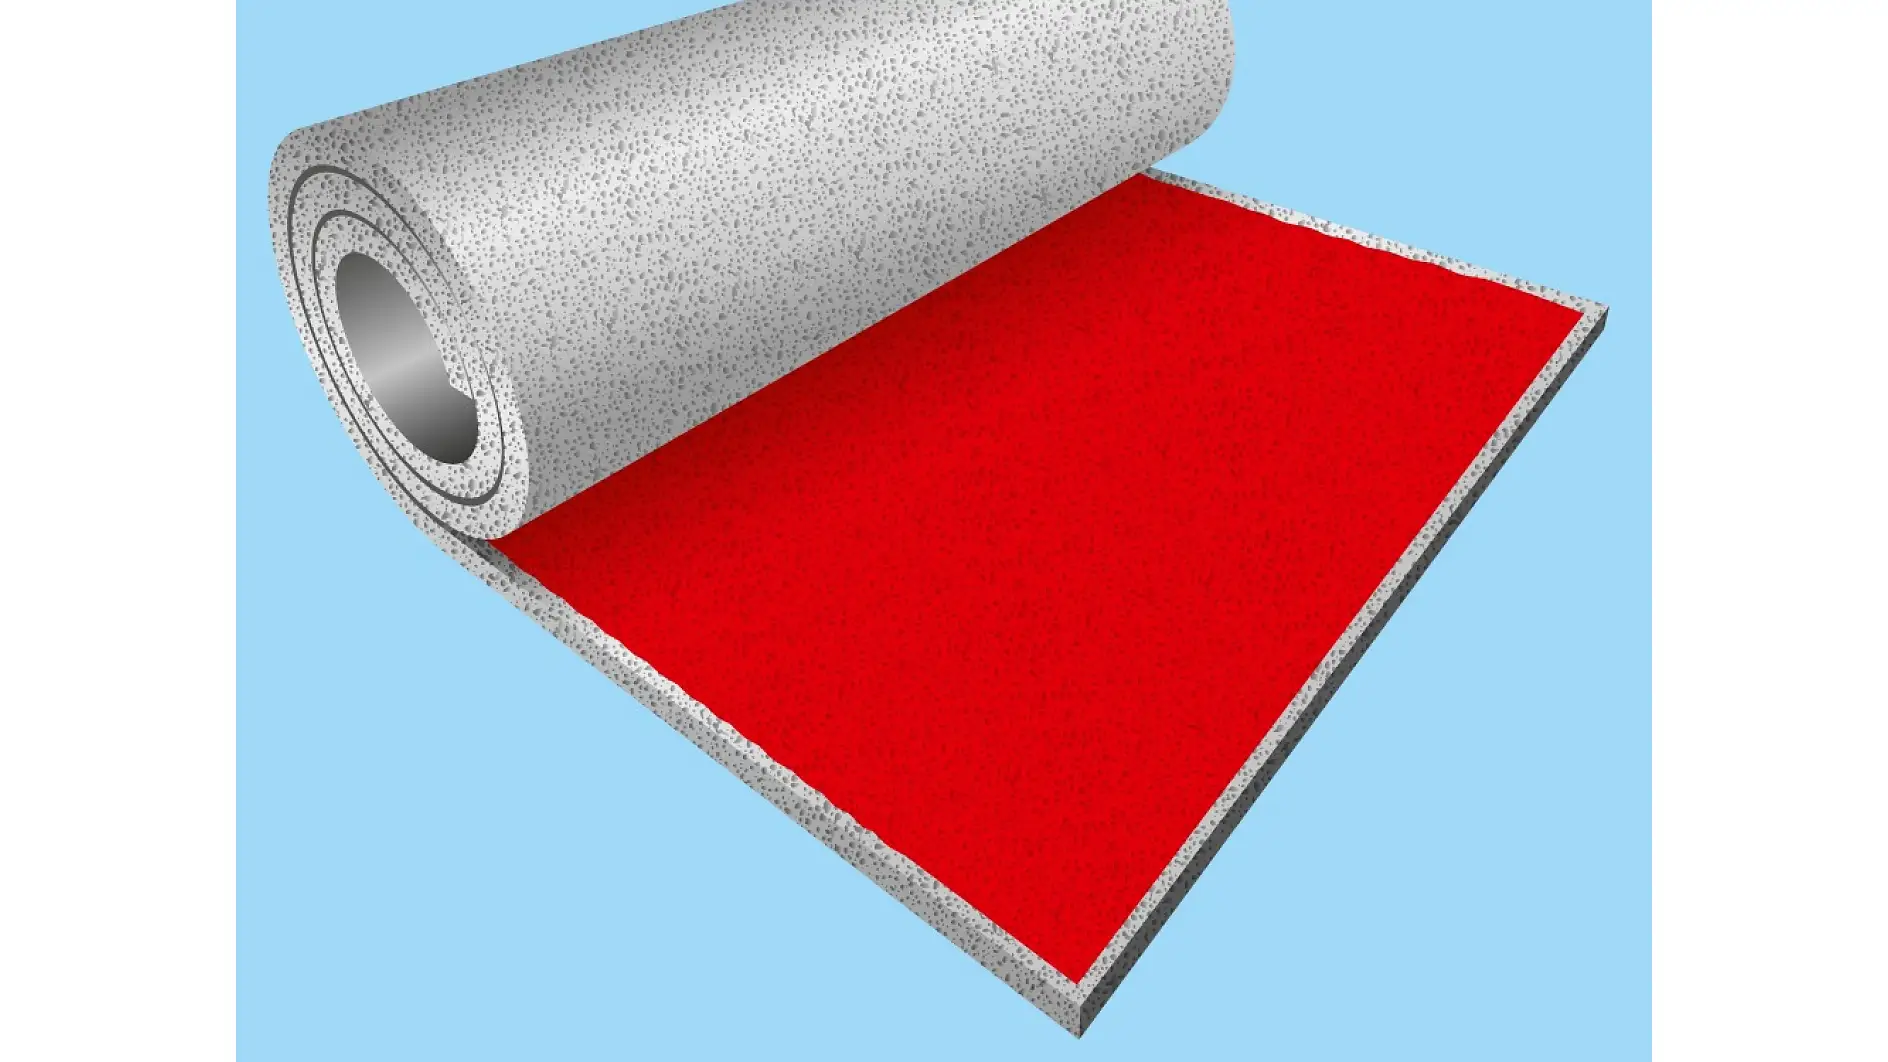 Using transfer and scrim backed tapes for foam lamination.